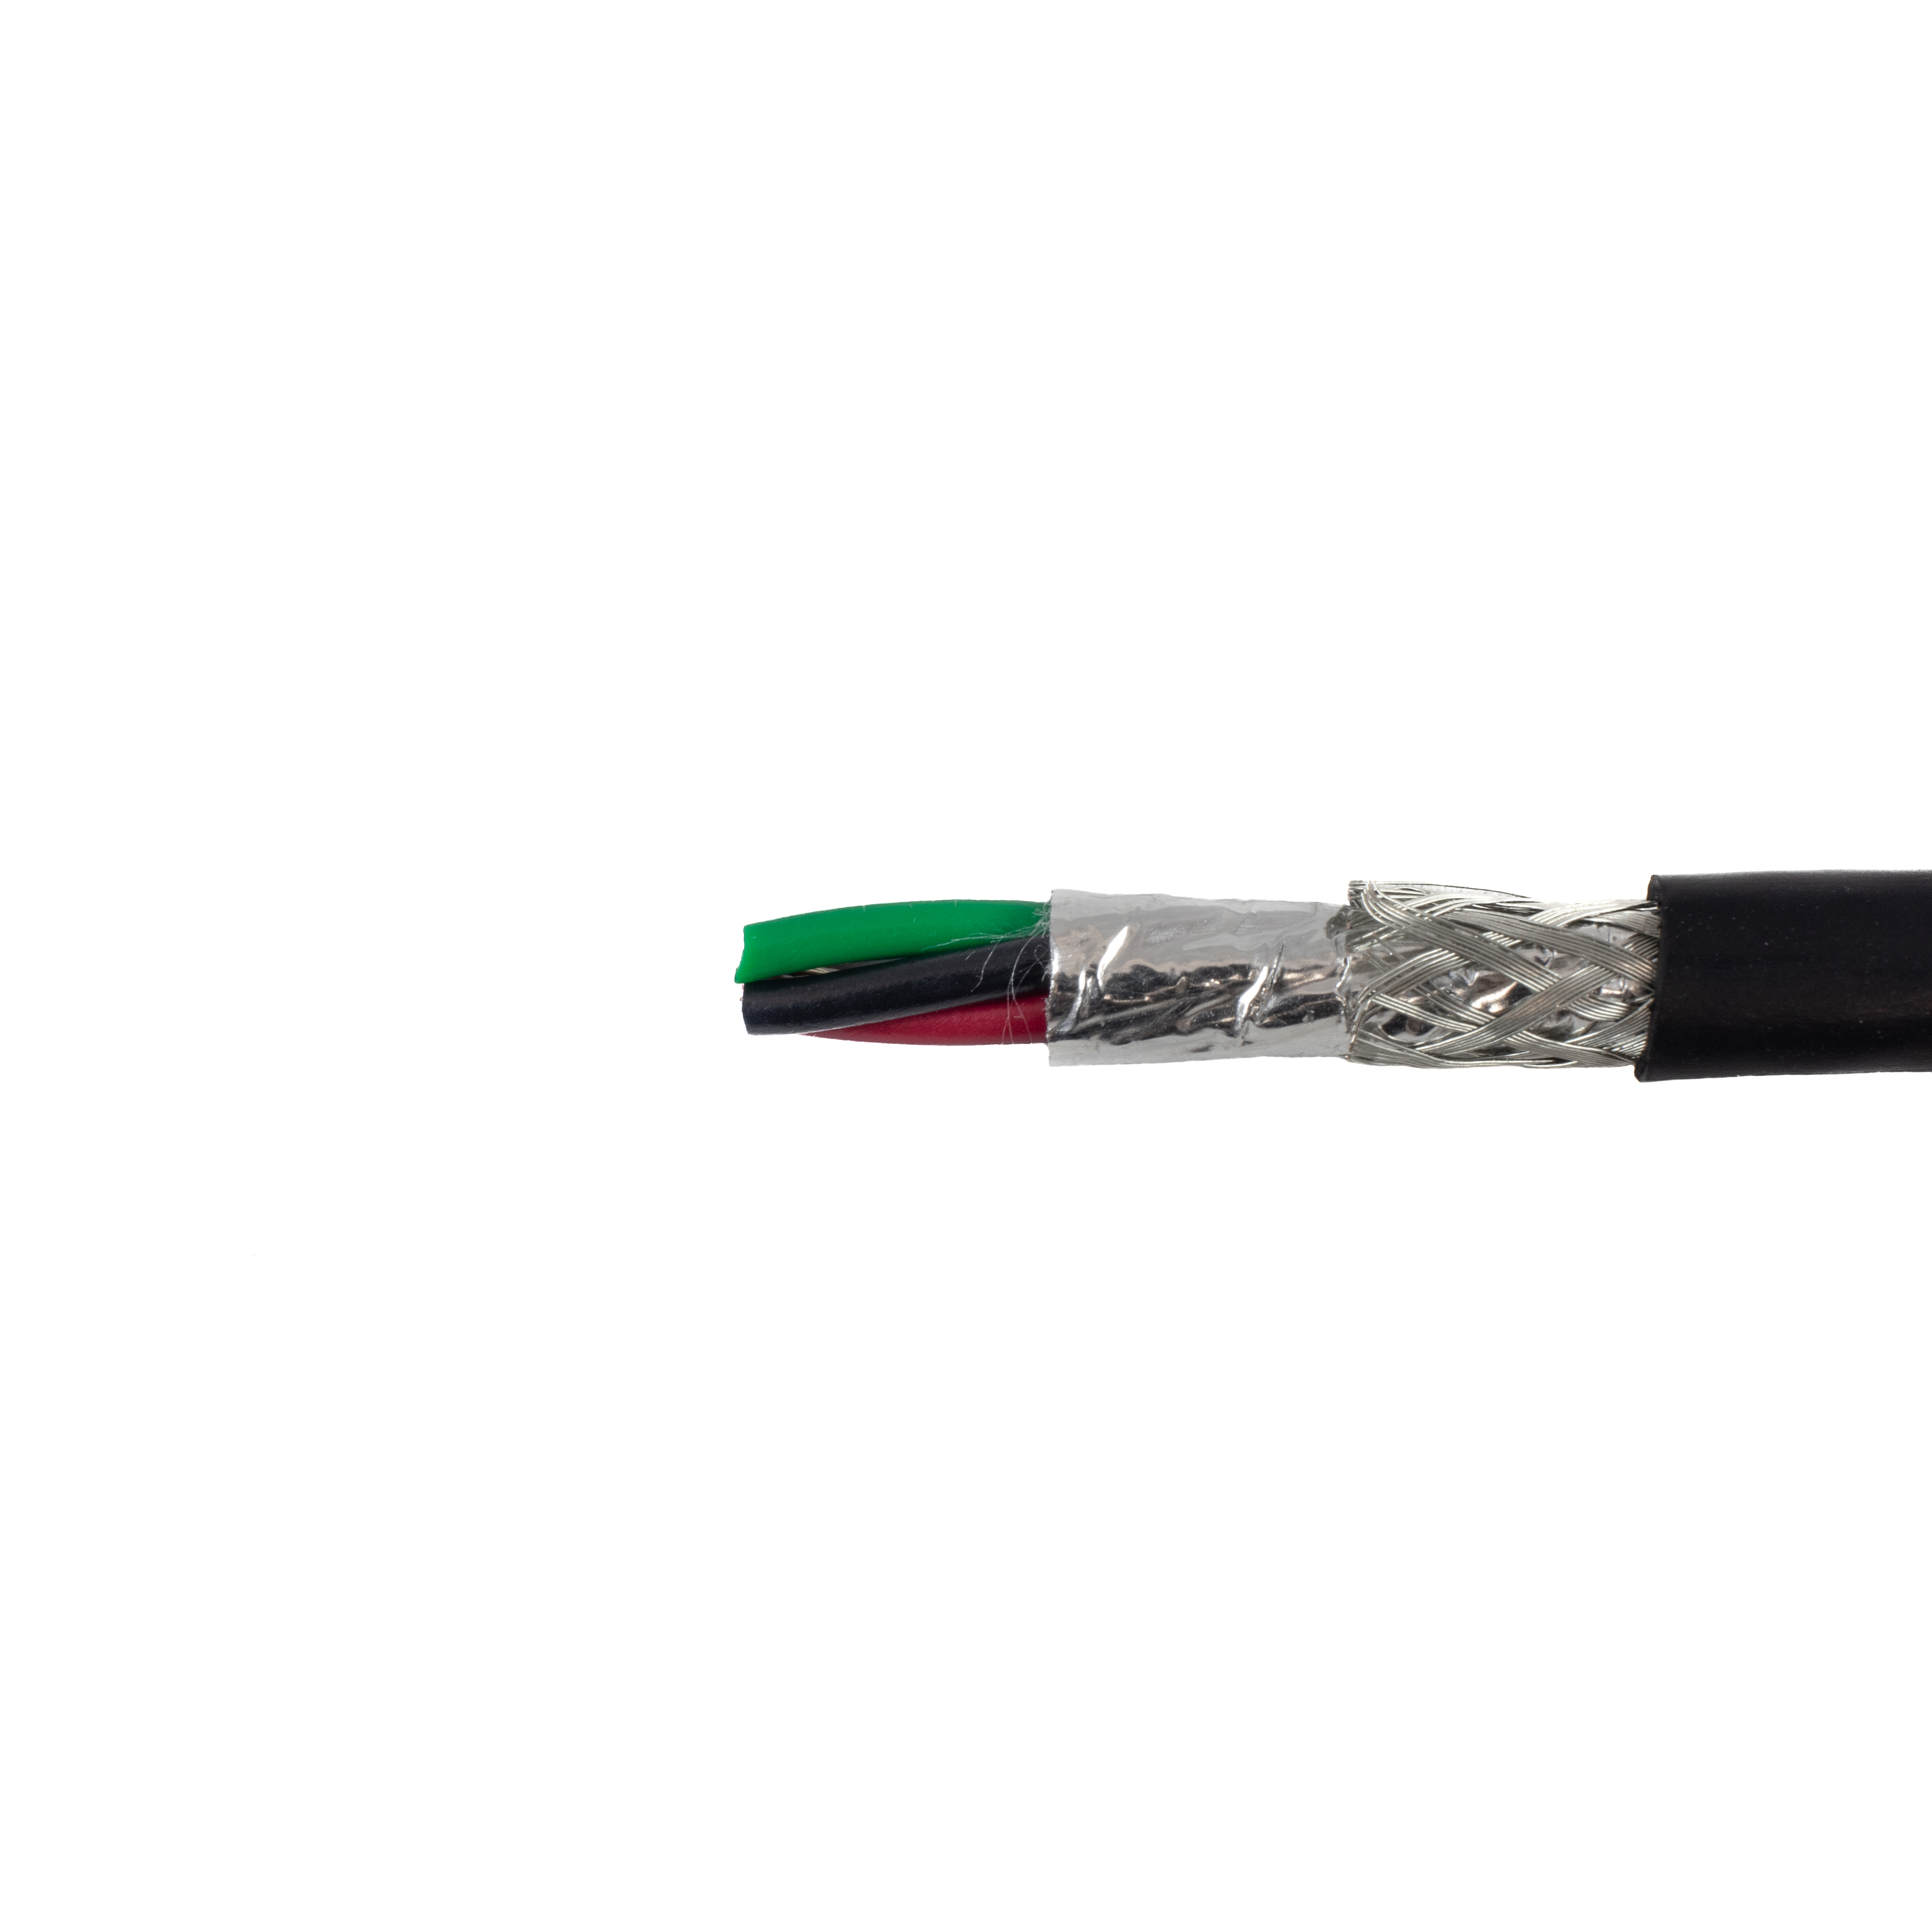 Lapp cables , Unika , Helu cable , Belden cable, Alpha wire, 3M cables